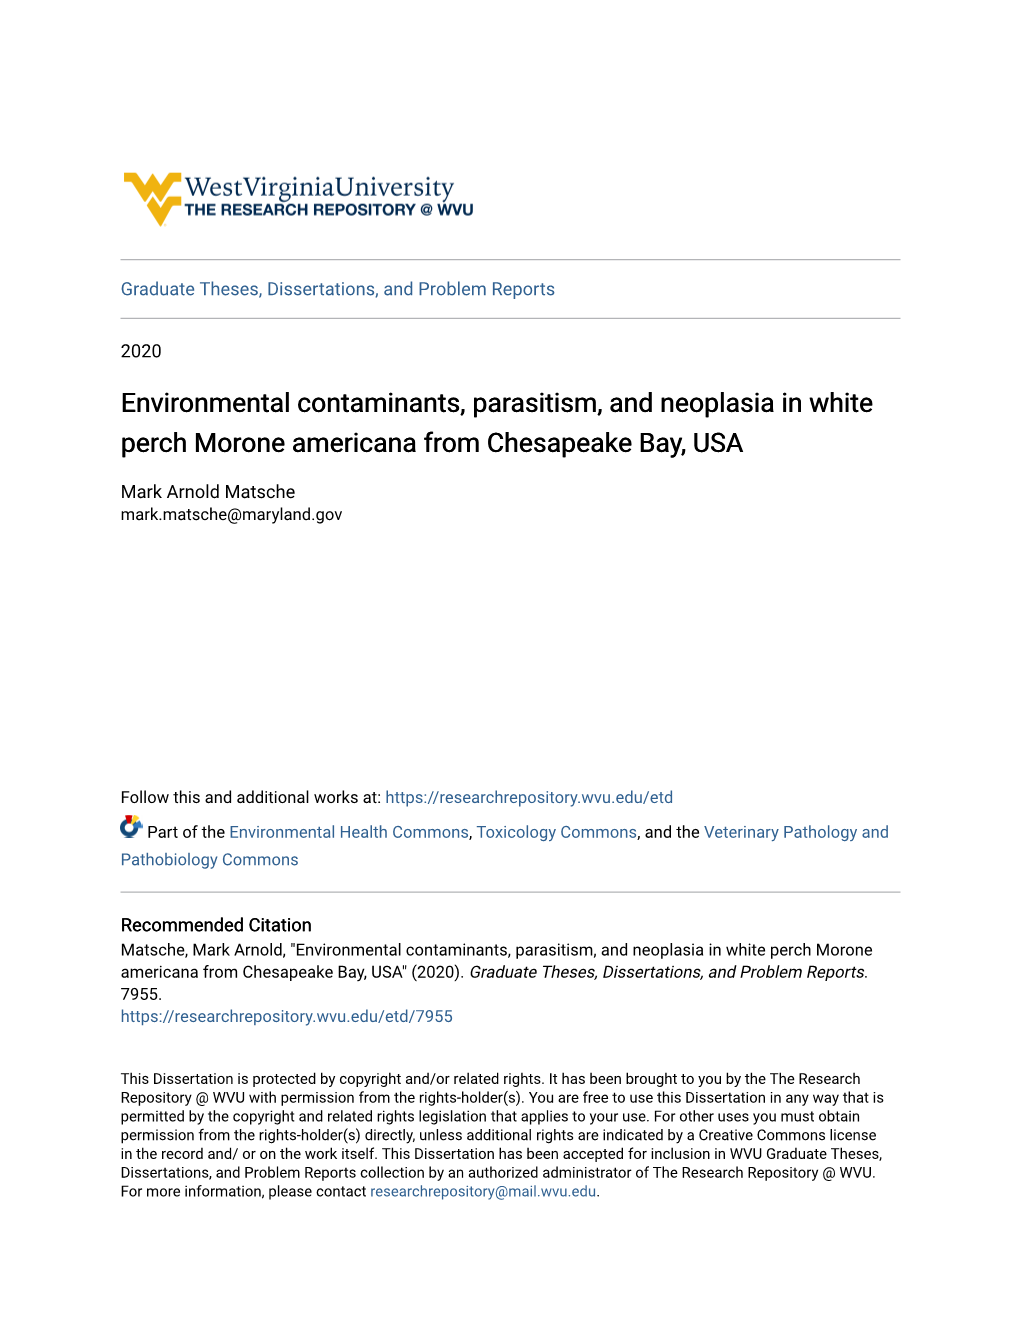 Environmental Contaminants, Parasitism, and Neoplasia in White Perch Morone Americana from Chesapeake Bay, USA